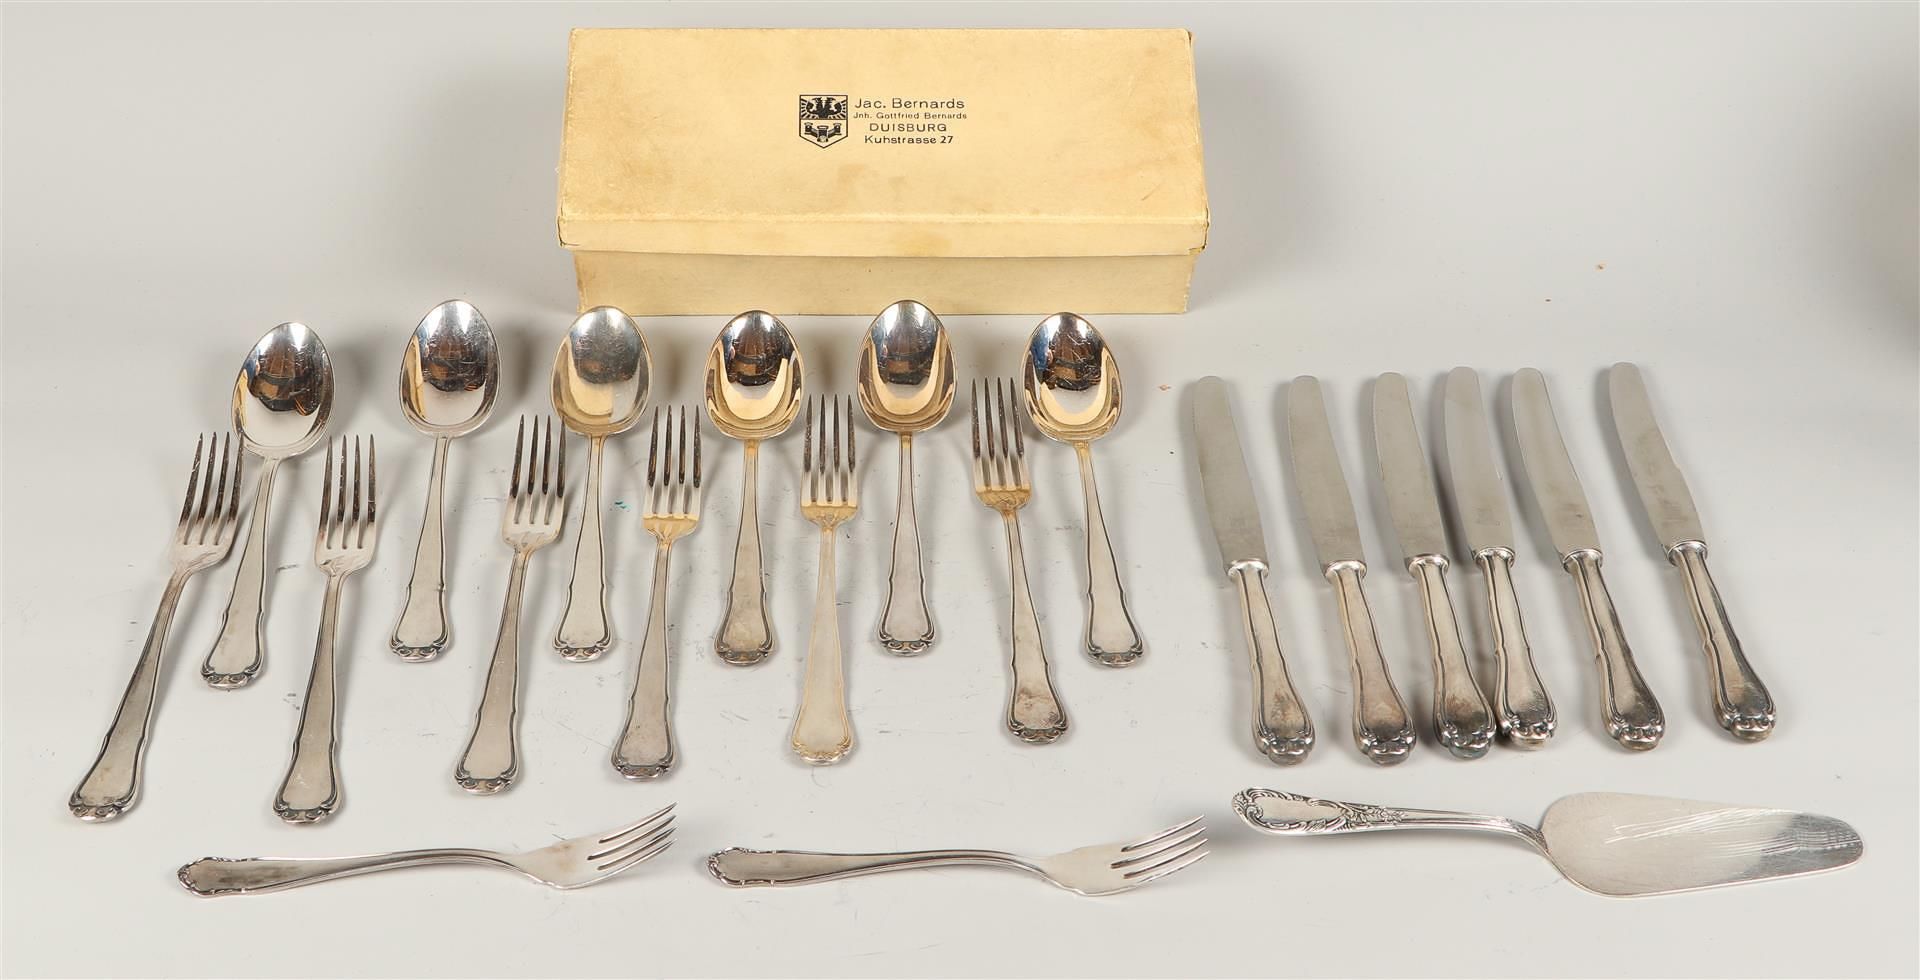 A six-piece silver plated cutlery set consisting of knives, forks, spoons, serving forks and cake se